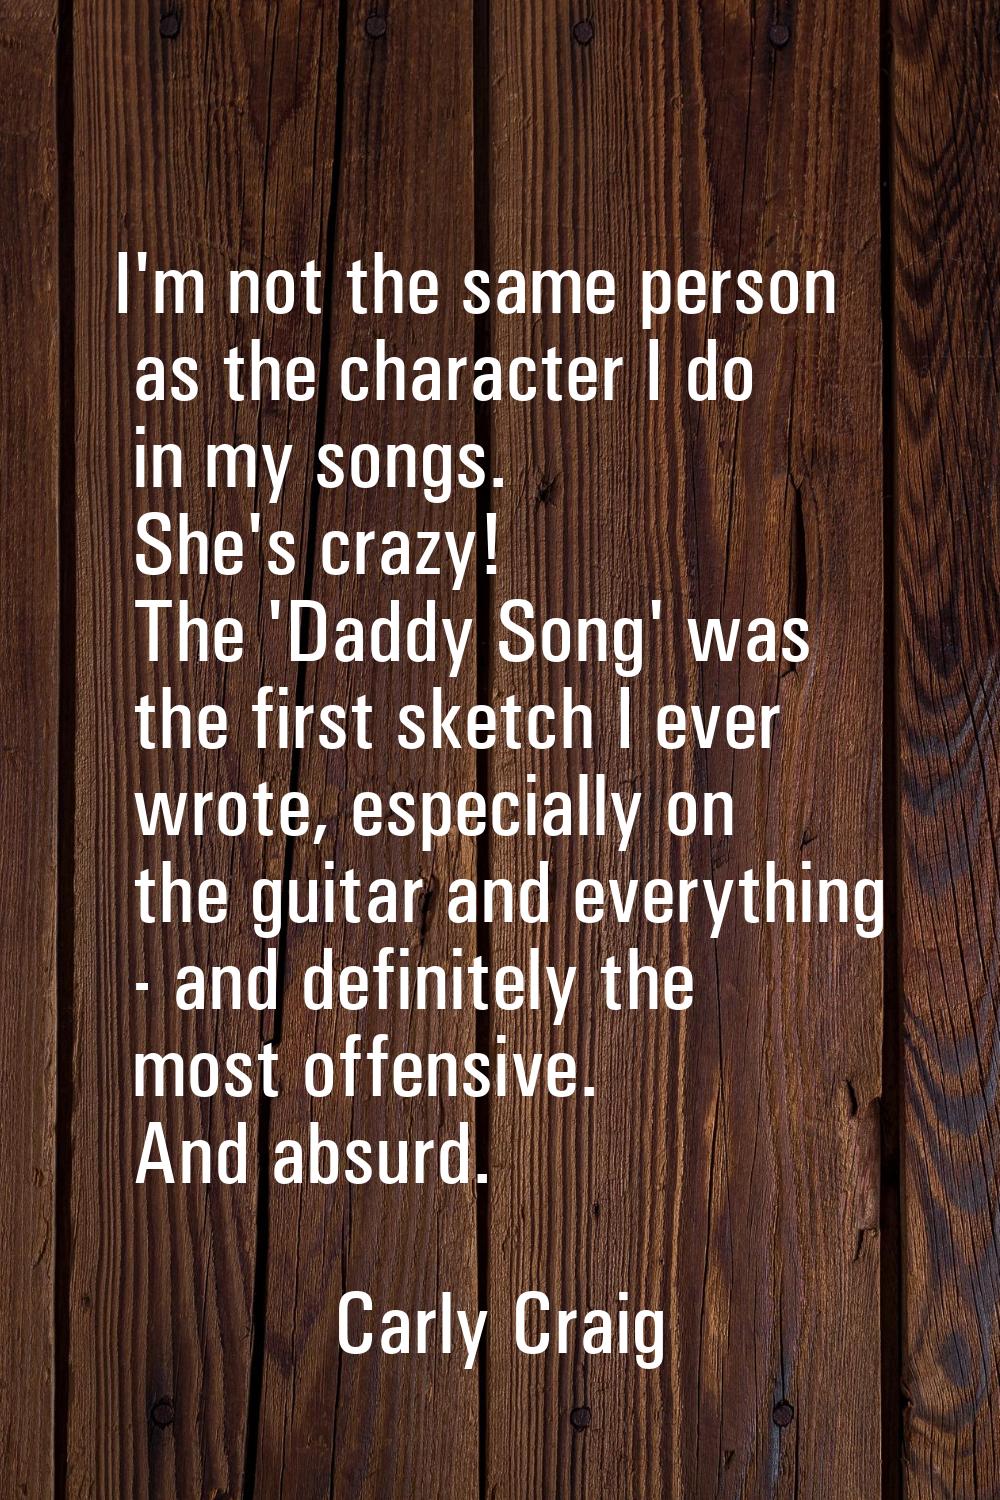 I'm not the same person as the character I do in my songs. She's crazy! The 'Daddy Song' was the fi